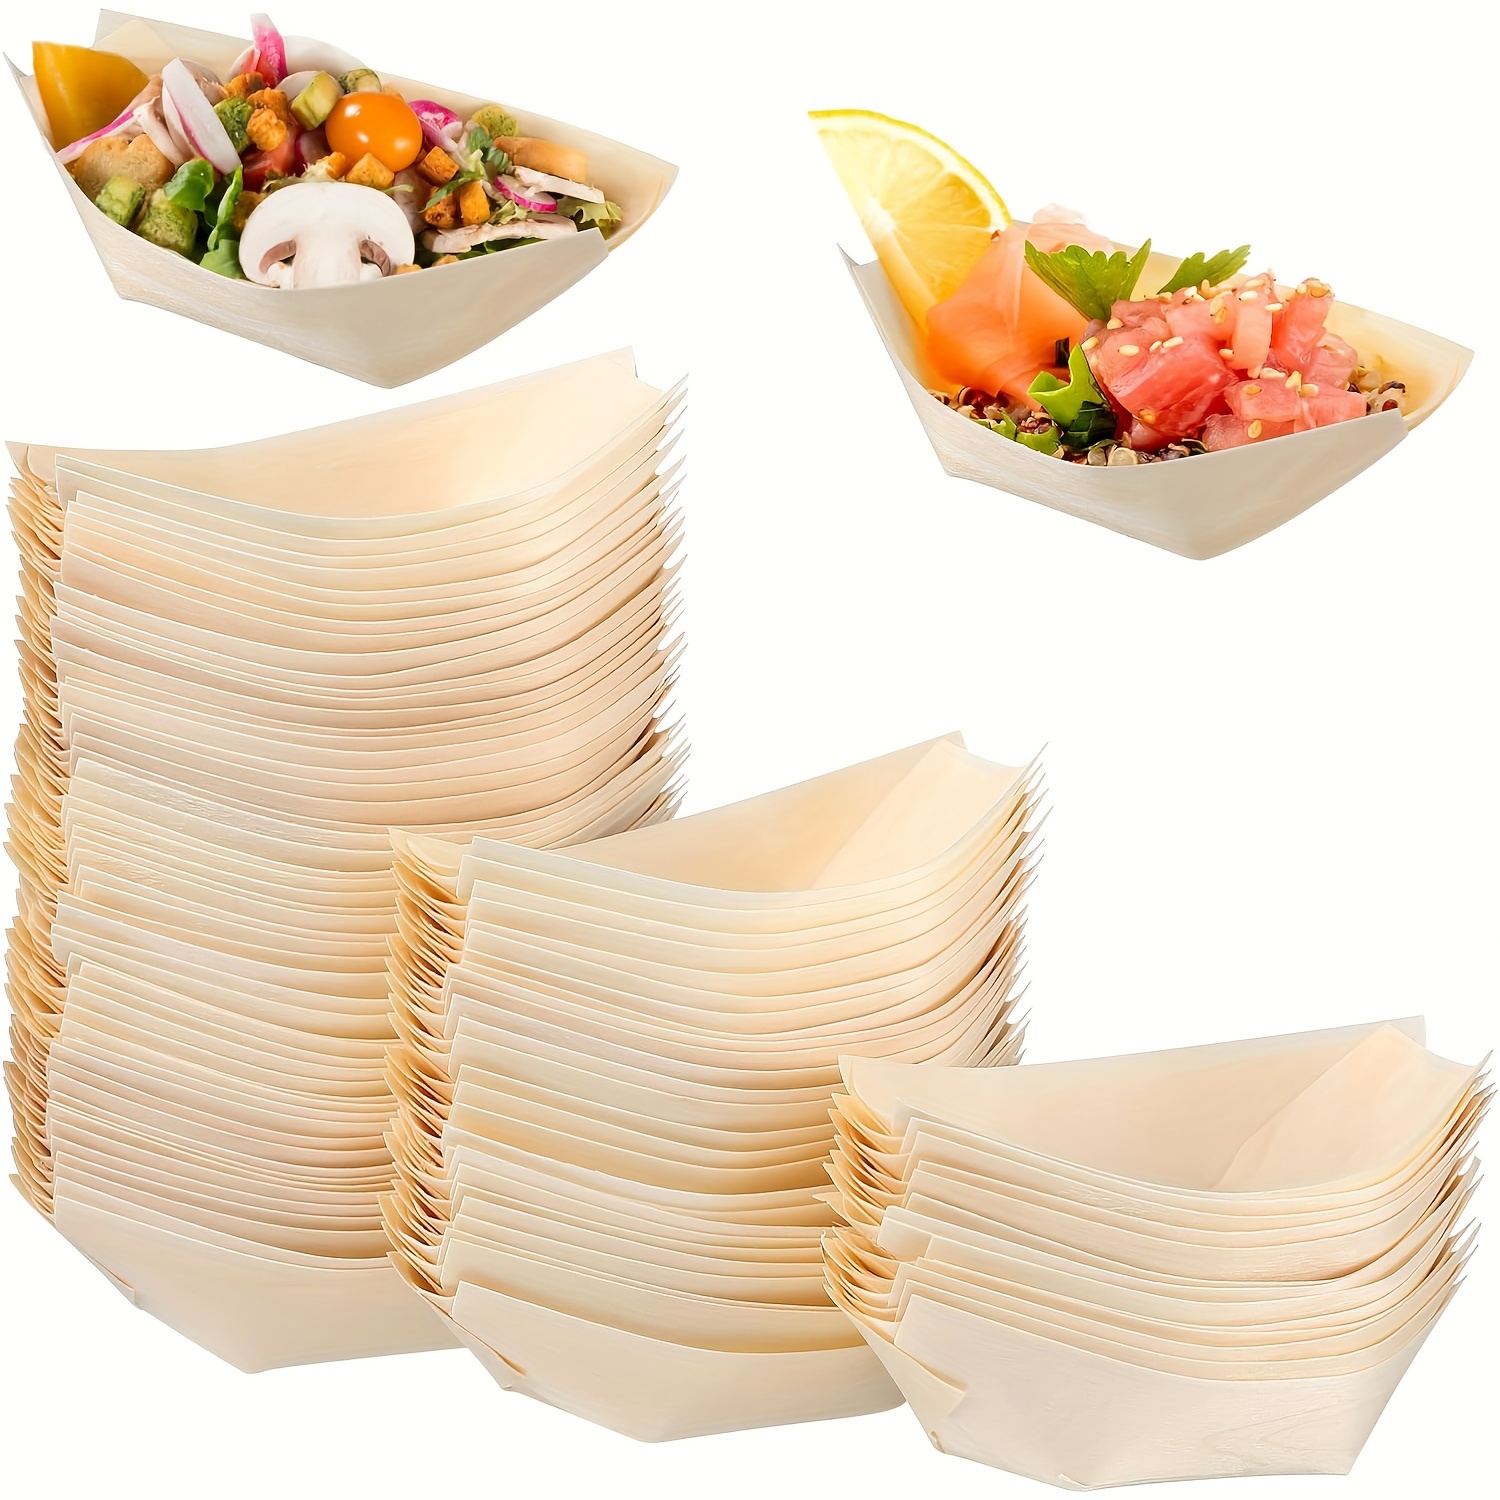 

50/20pcs, Wooden Boat Disposable Wood Boat Plates Dishes Mini Sushi Boat Sushi Serving Tray Bamboo Leaf Boat Food Container Wood Bowl For Catering And Home Use